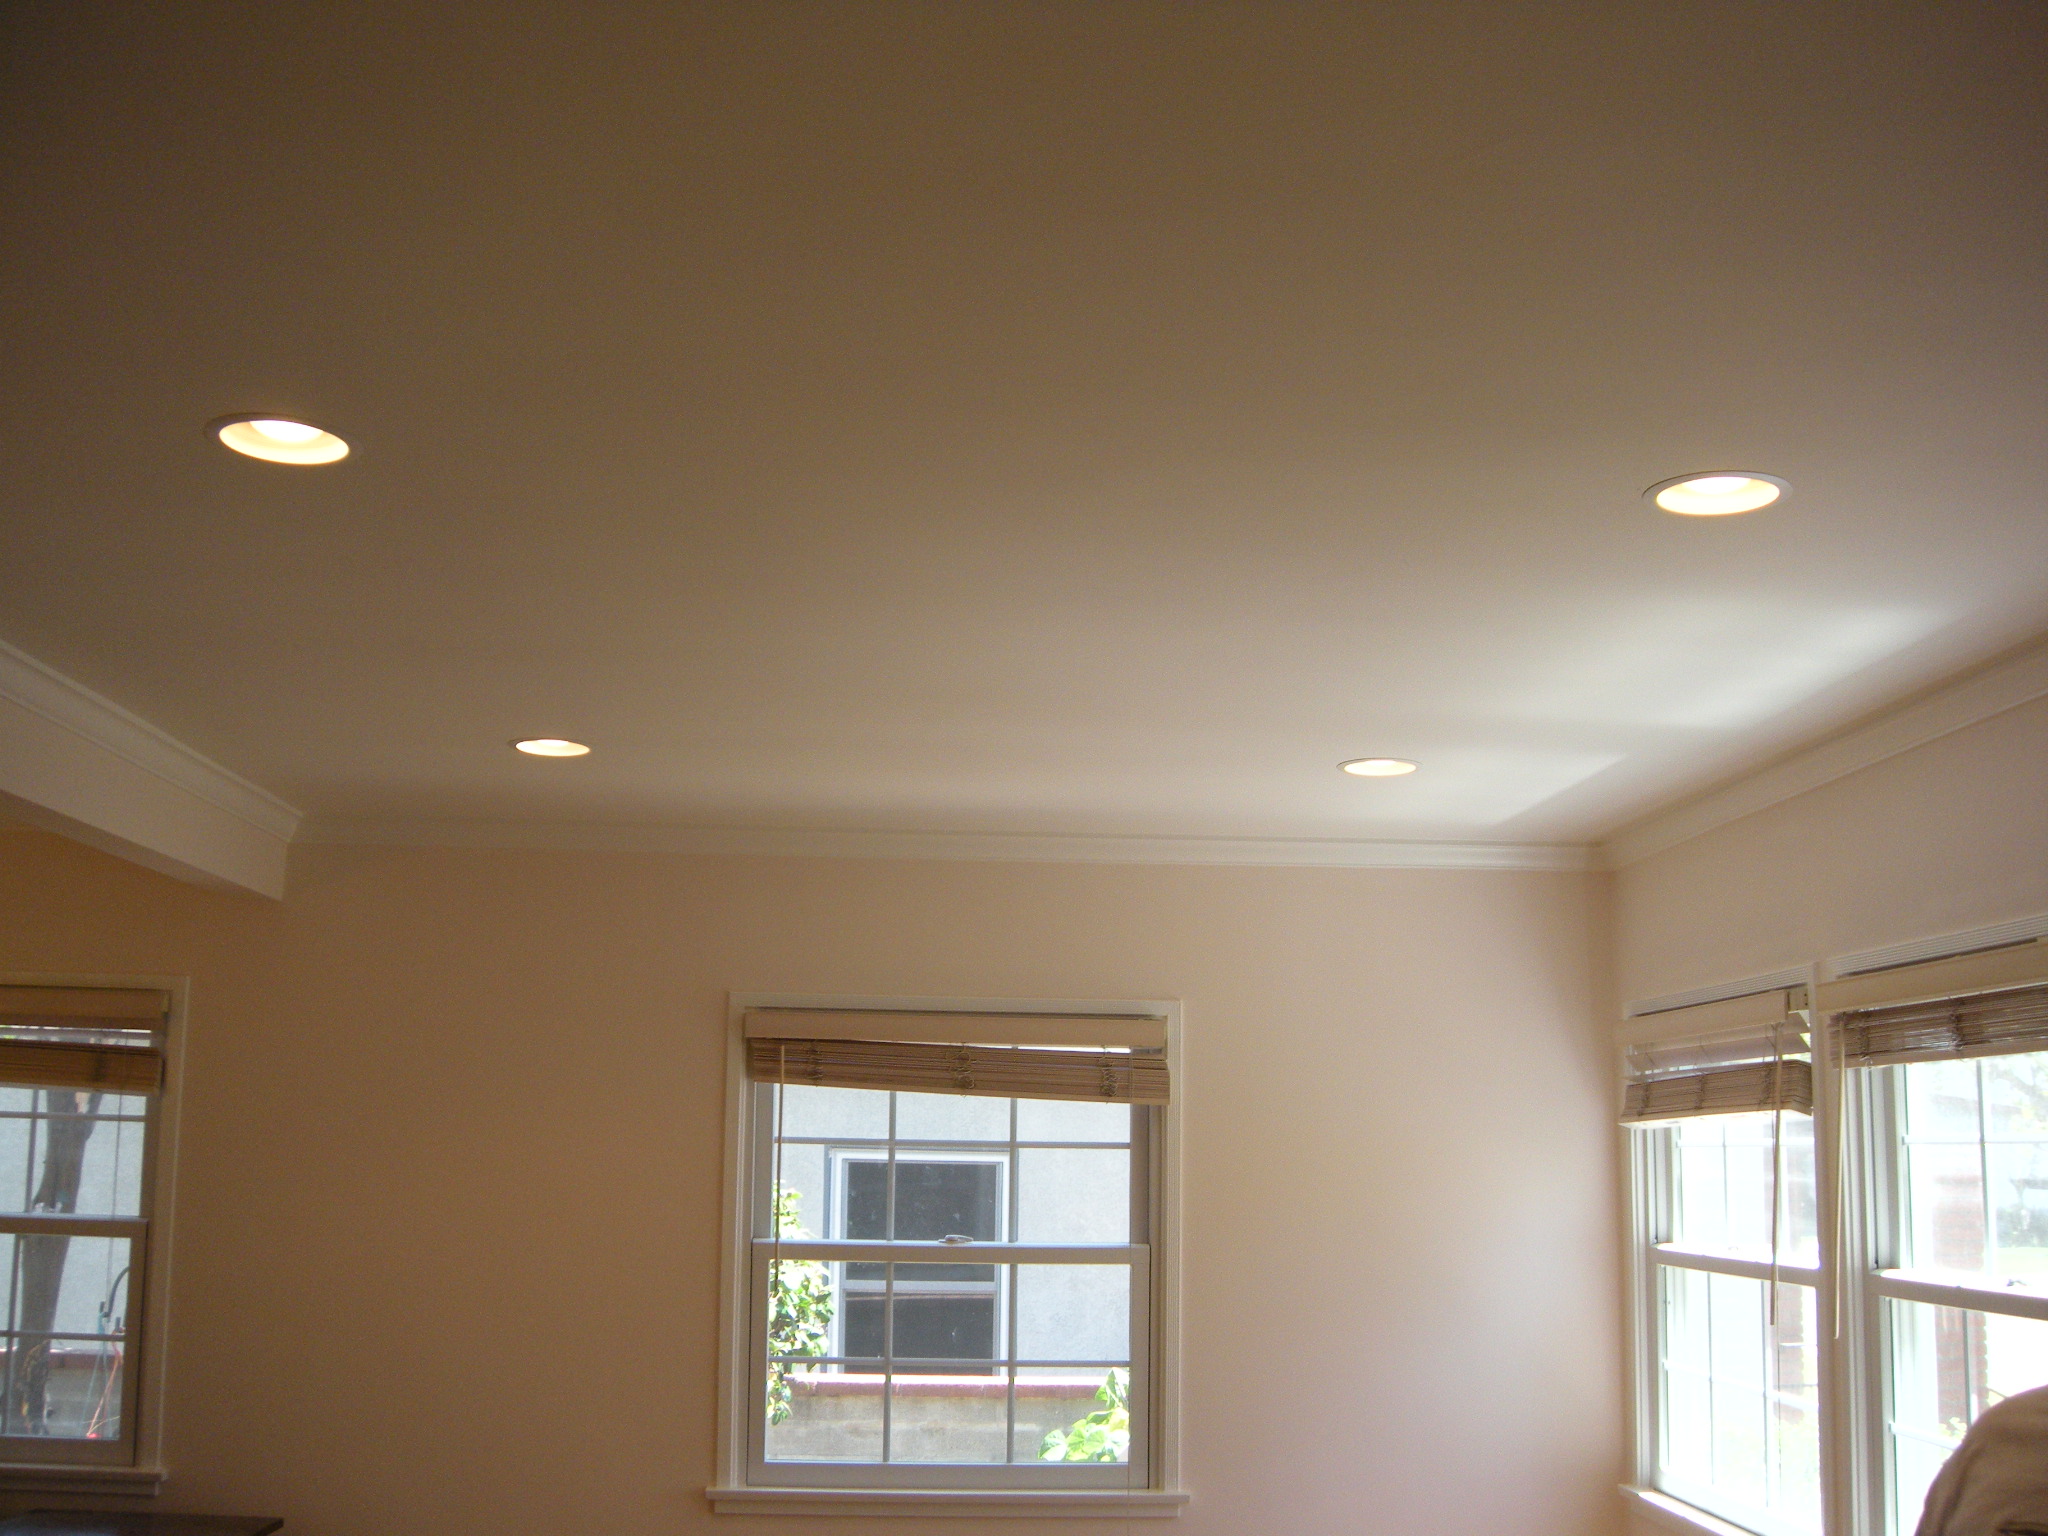 8 kitchen ceiling recessed lighting